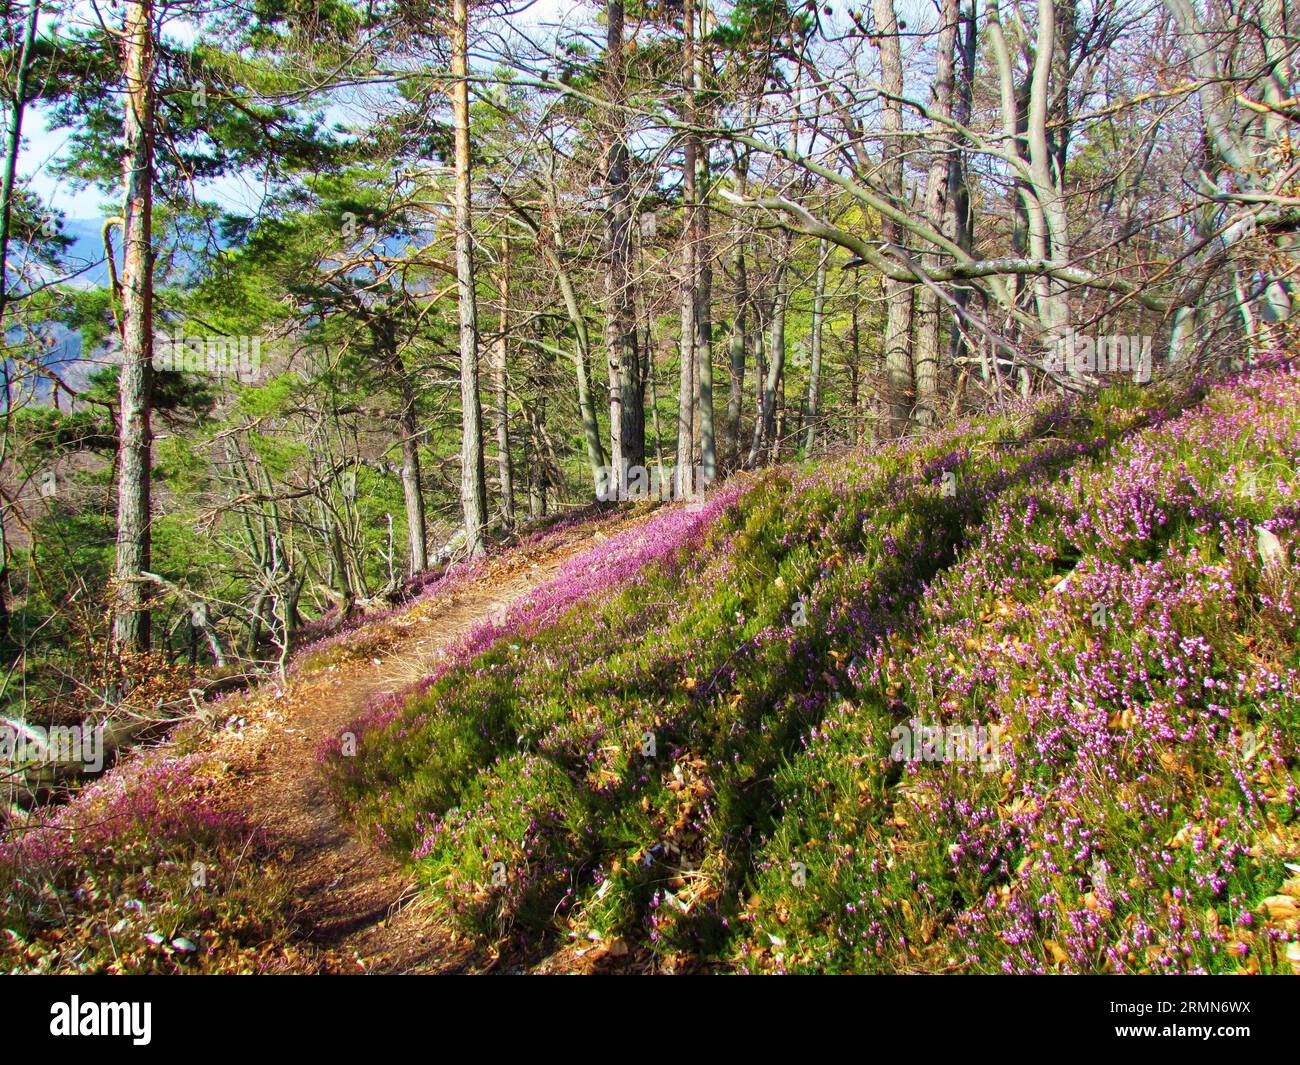 Scots pine and beech forest in Slovenia with pink flowering winter heath, spring heath, alpine heath (Erica carnea) covering the ground Stock Photo